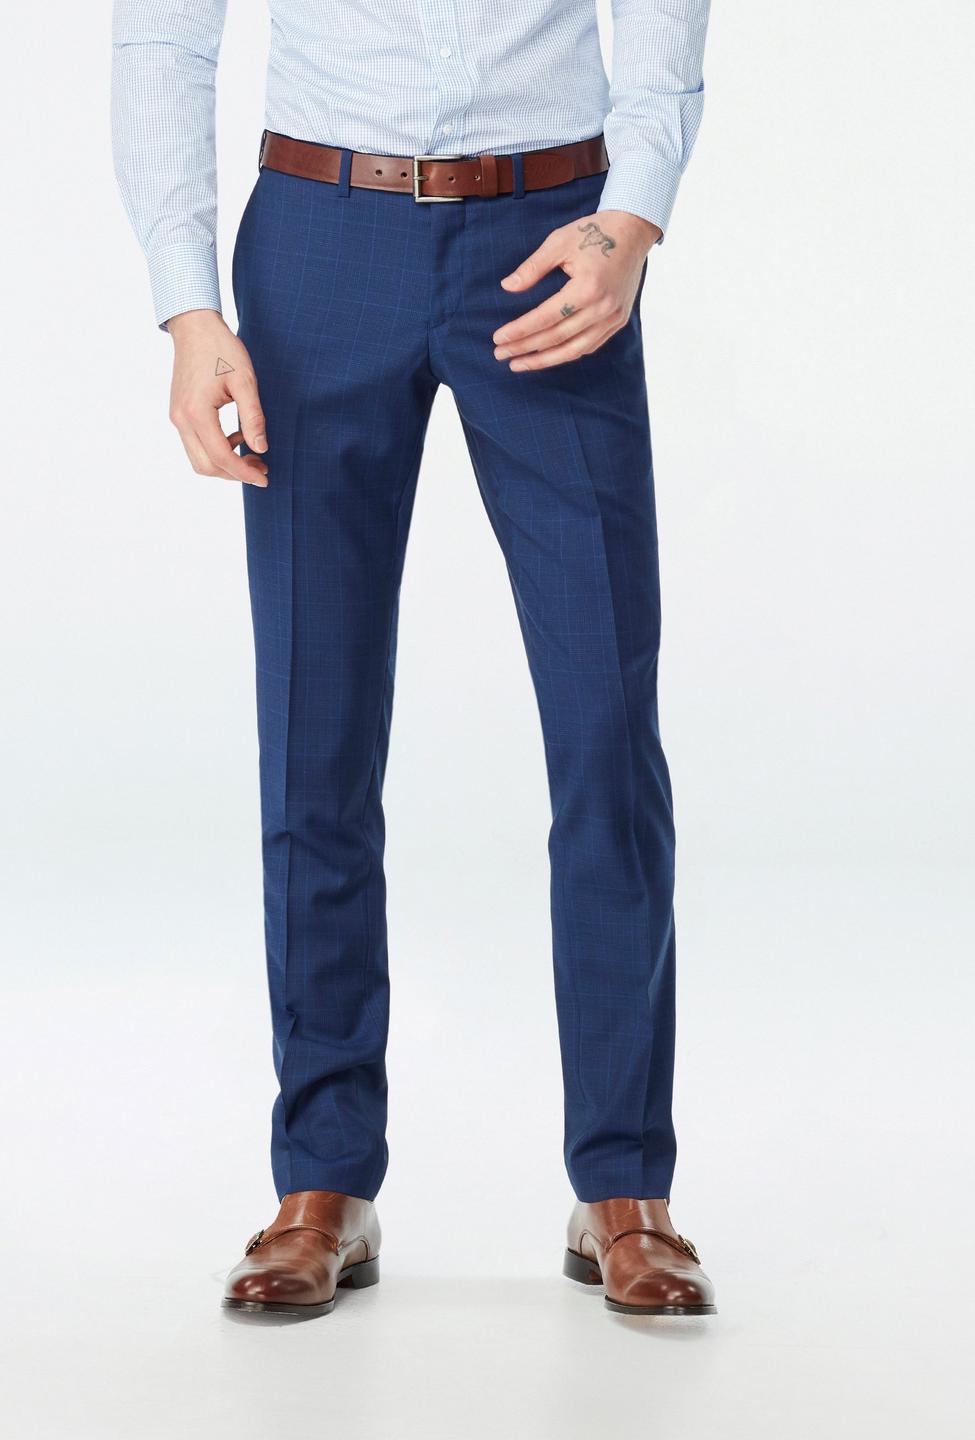 Navy pants - Hemsworth Plaid Design from Premium Indochino Collection